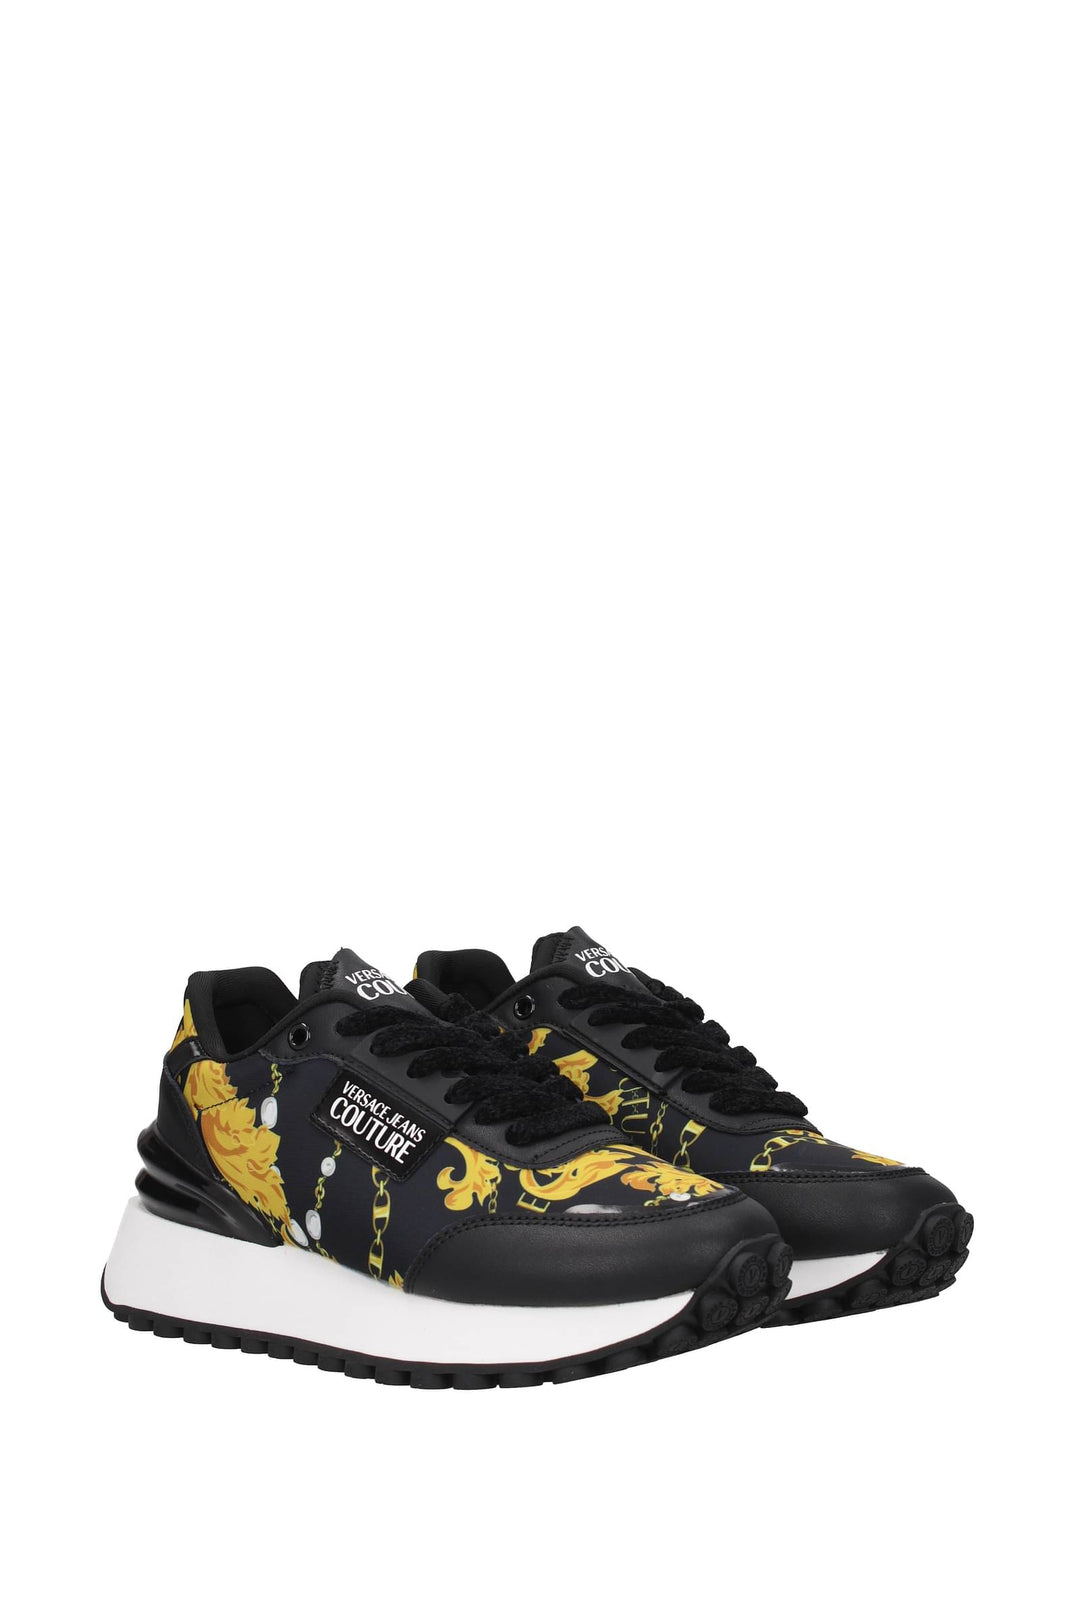 Versace Jeans Sneakers Couture Tessuto Nero - Versace Jeans Couture - Donna